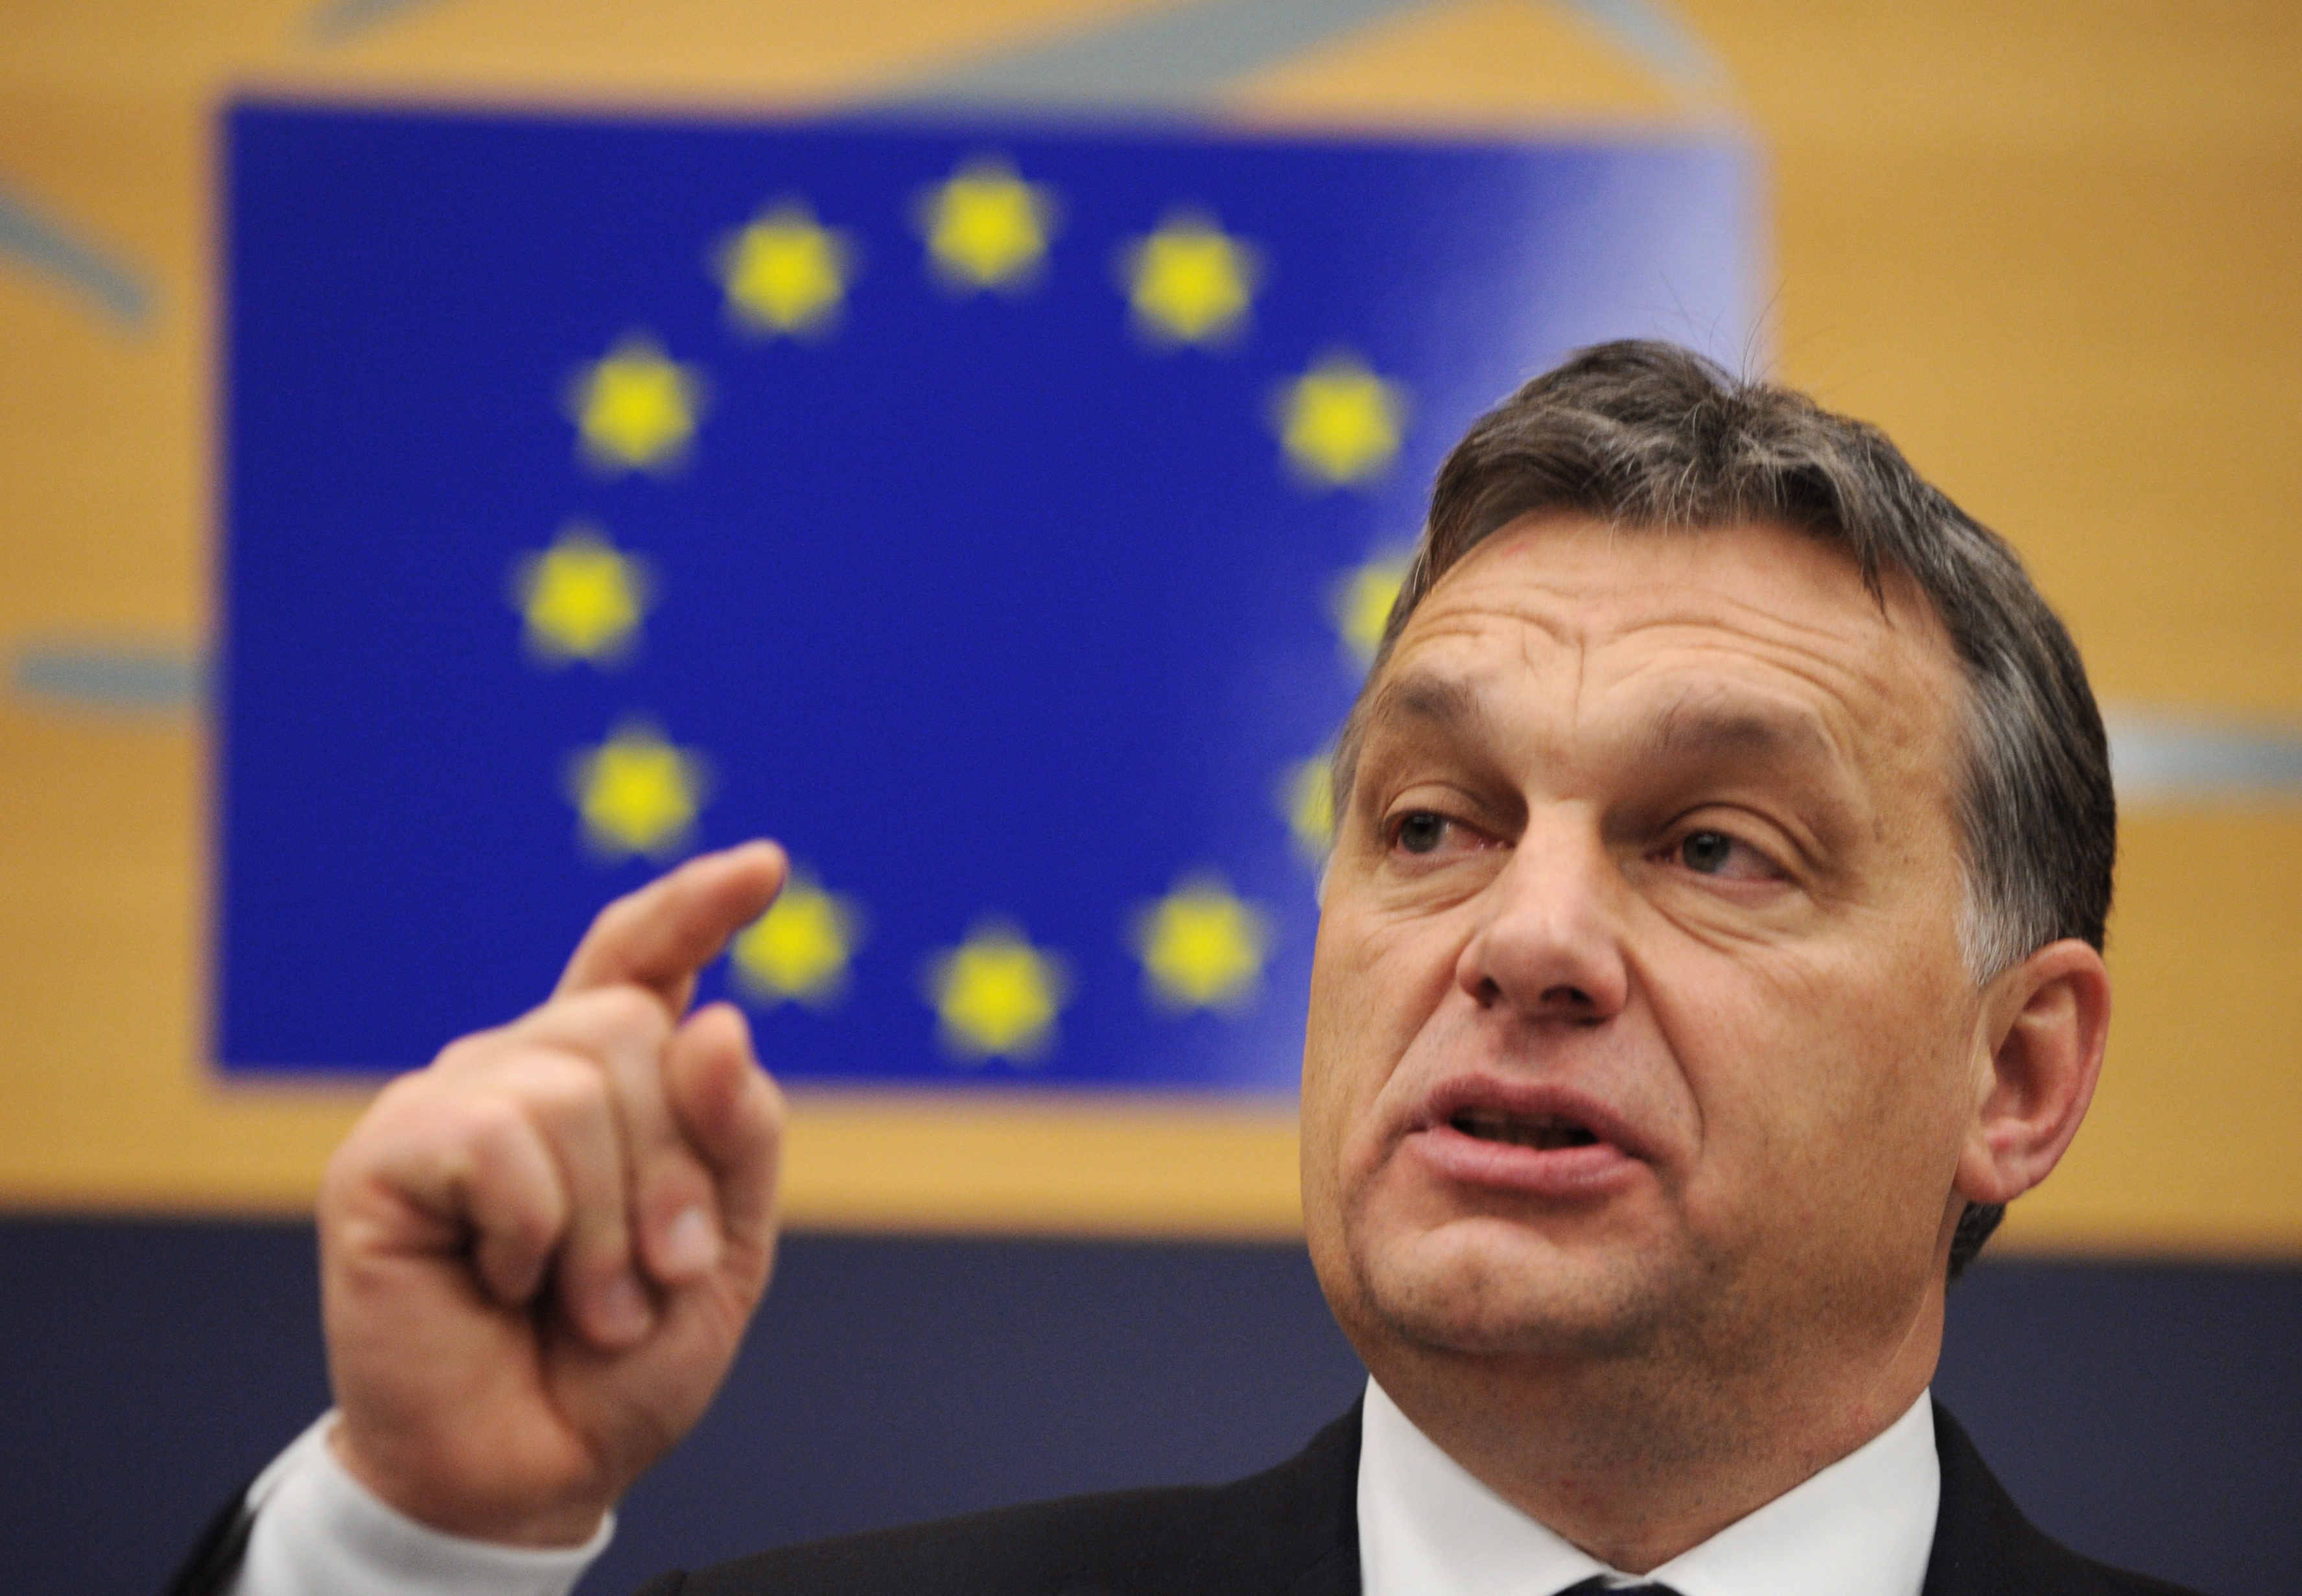 Hungarian Prime Minister Viktor Orban gestures during a media conference in the European Parliament in Strasbourg, France, 18 January 2012. Orban coolly acknowledged international concern over his domestic reforms, saying that fixing what led the European Union to launch high-profile legal proceedings against Budapest 'will not pose a problem.' EPA/PATRICK SEEGER